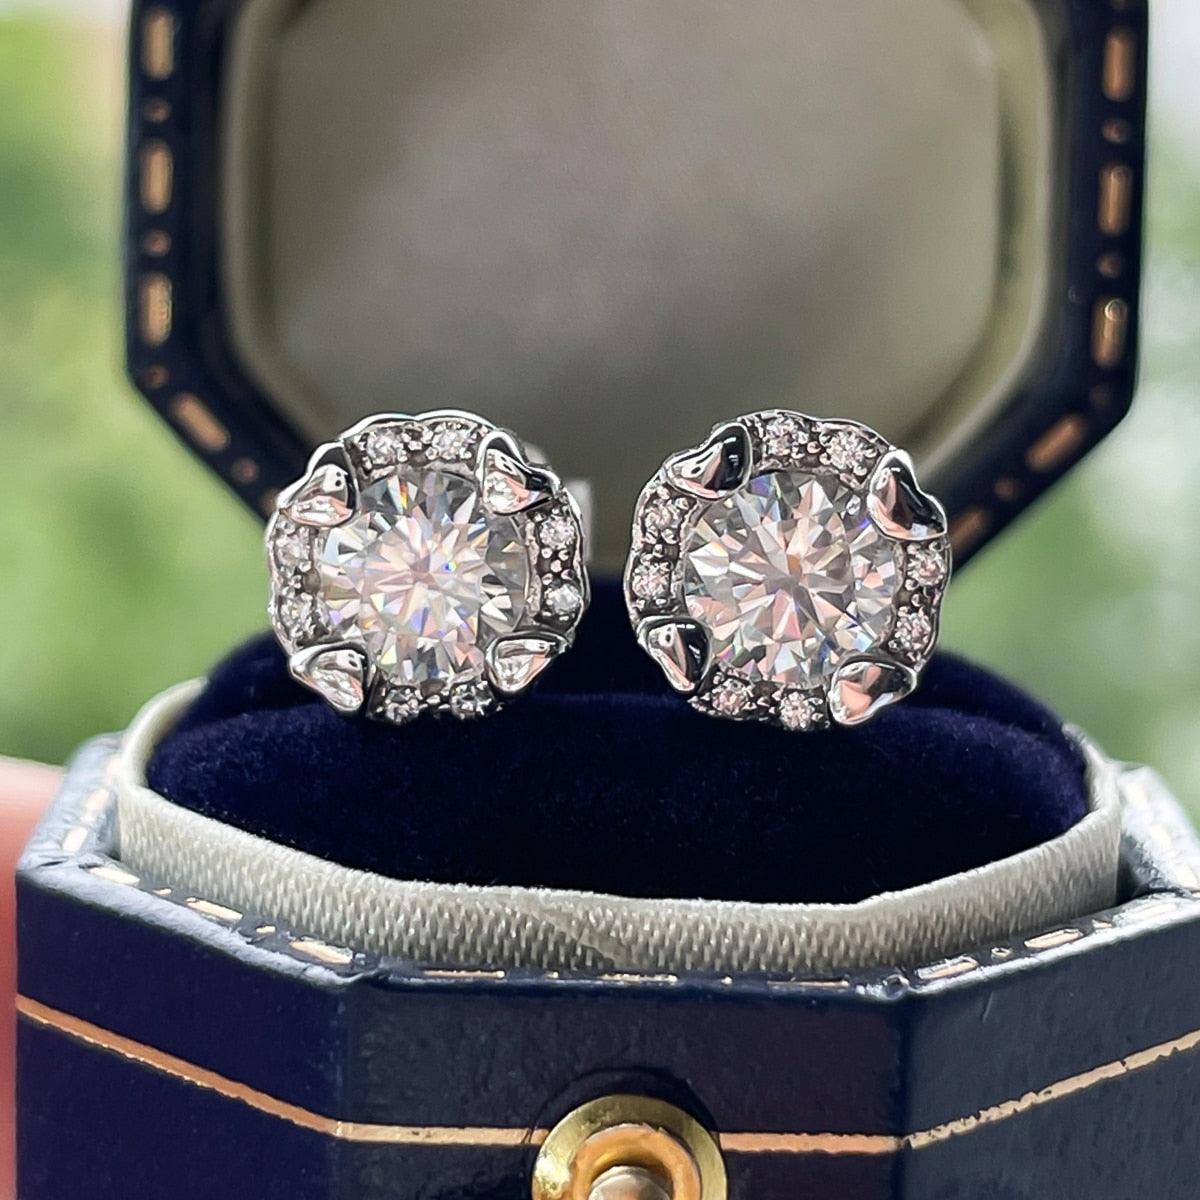 Excellent 1 Carat Total D Color ♥︎ High Quality Moissanite Diamonds ♥︎ Heart Stud Earrings - Fine Jewellery - The Jewellery Supermarket